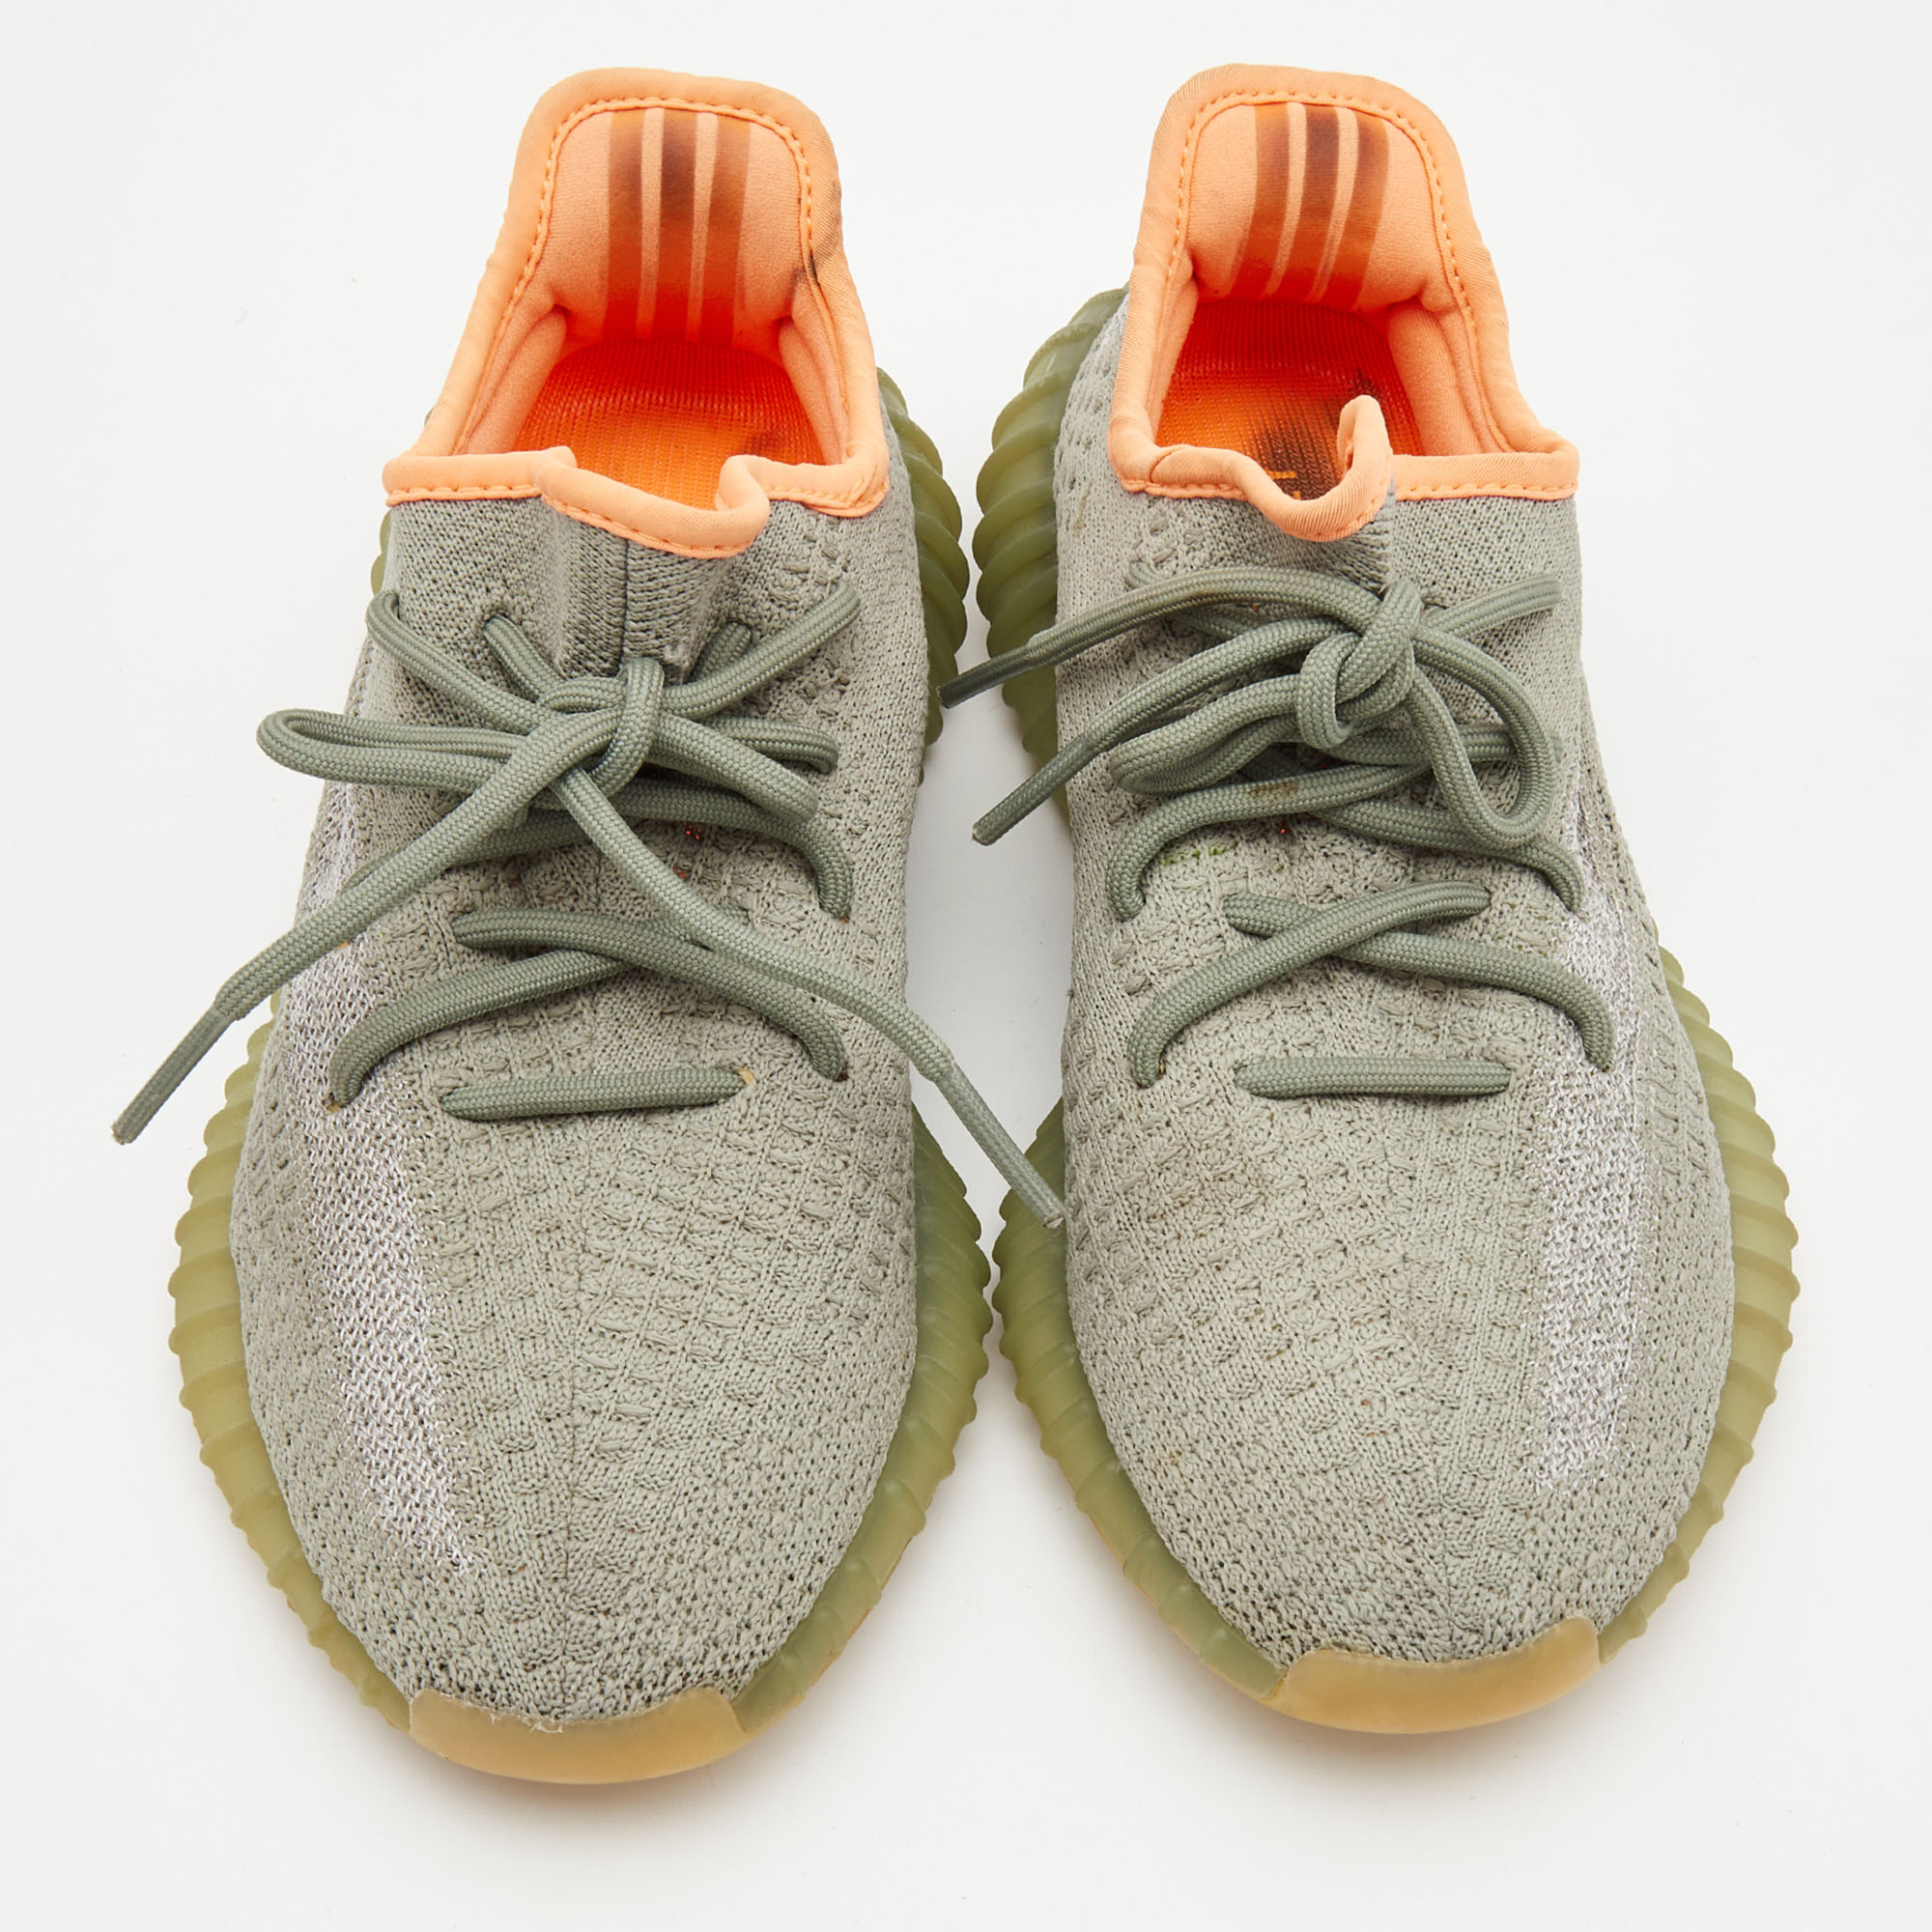 Yeezy X Adidas Green Fabric Boost 350 V2 Desert-Sage Sneakers Size 38